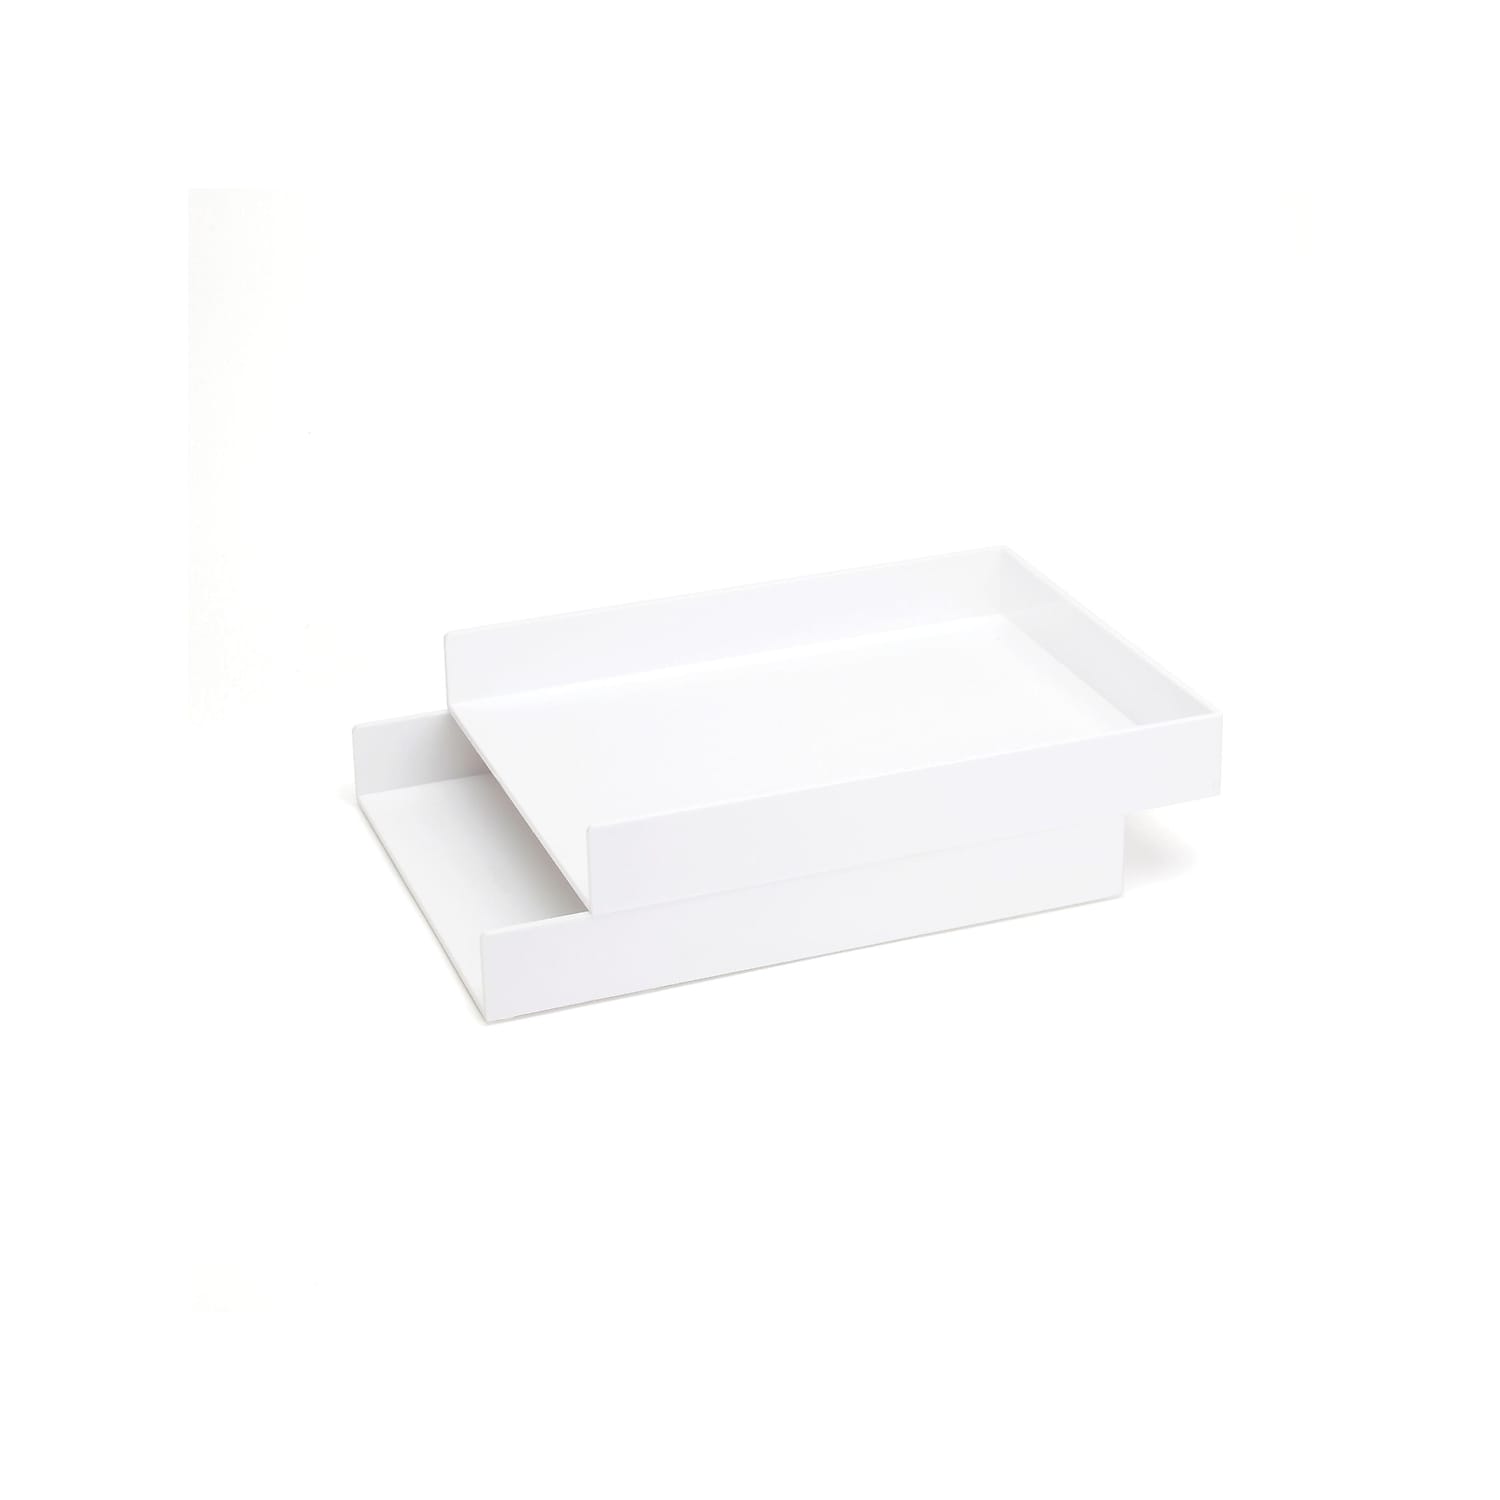 Poppin Front Loading Letter Trays White 2/Pack 100212 - image 1 of 3